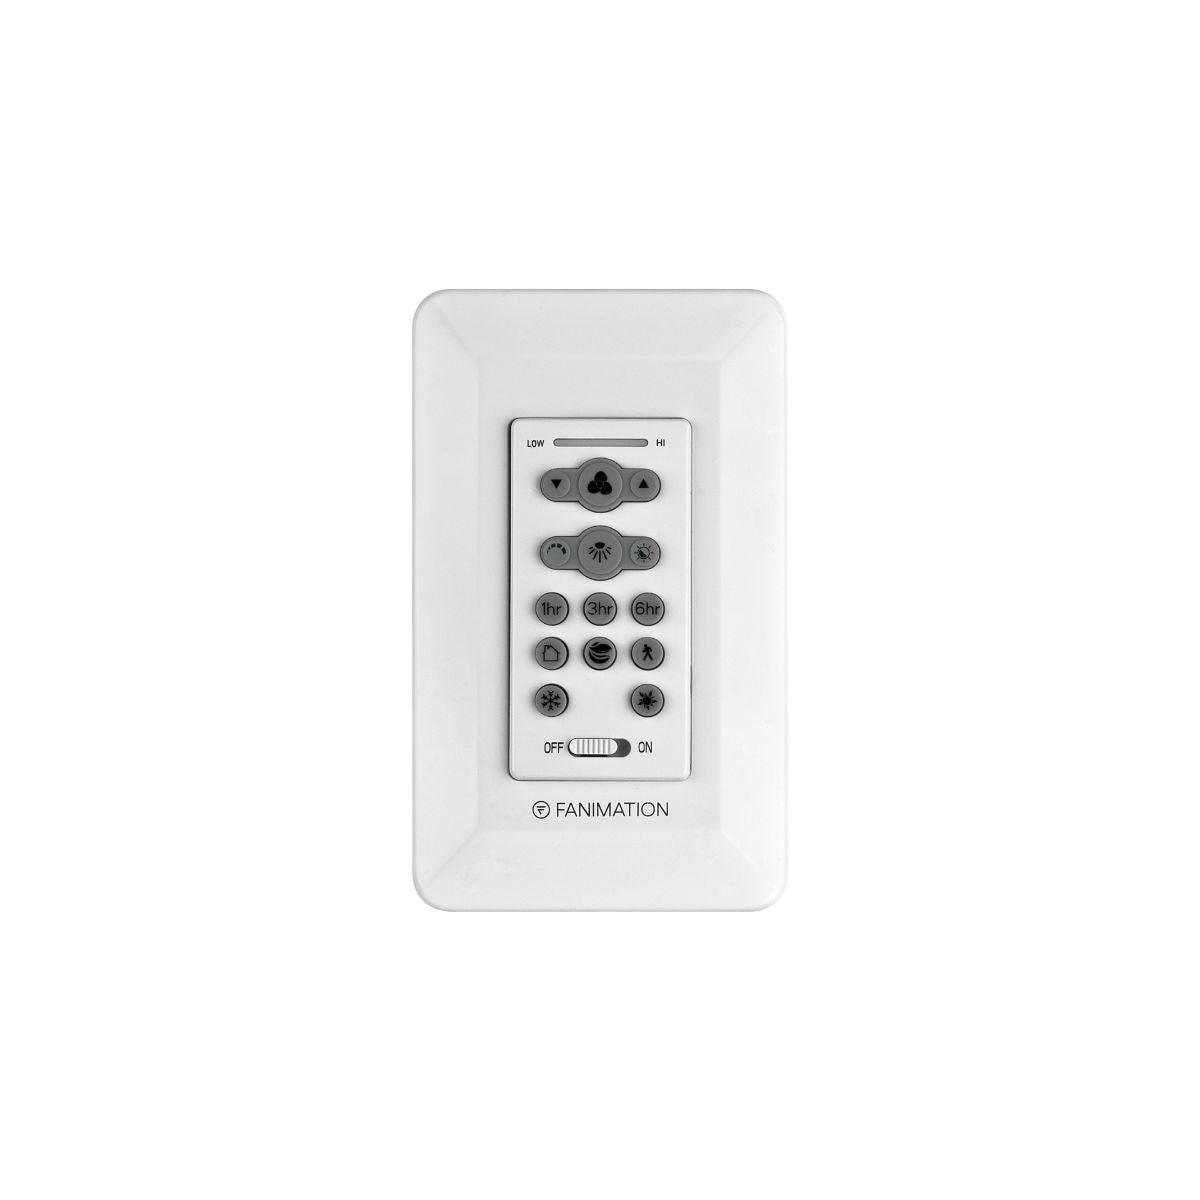 DC Motor 1.25-Amp Fully Variable Wired Touch Fan Control with Wall Plate Included, White Finish